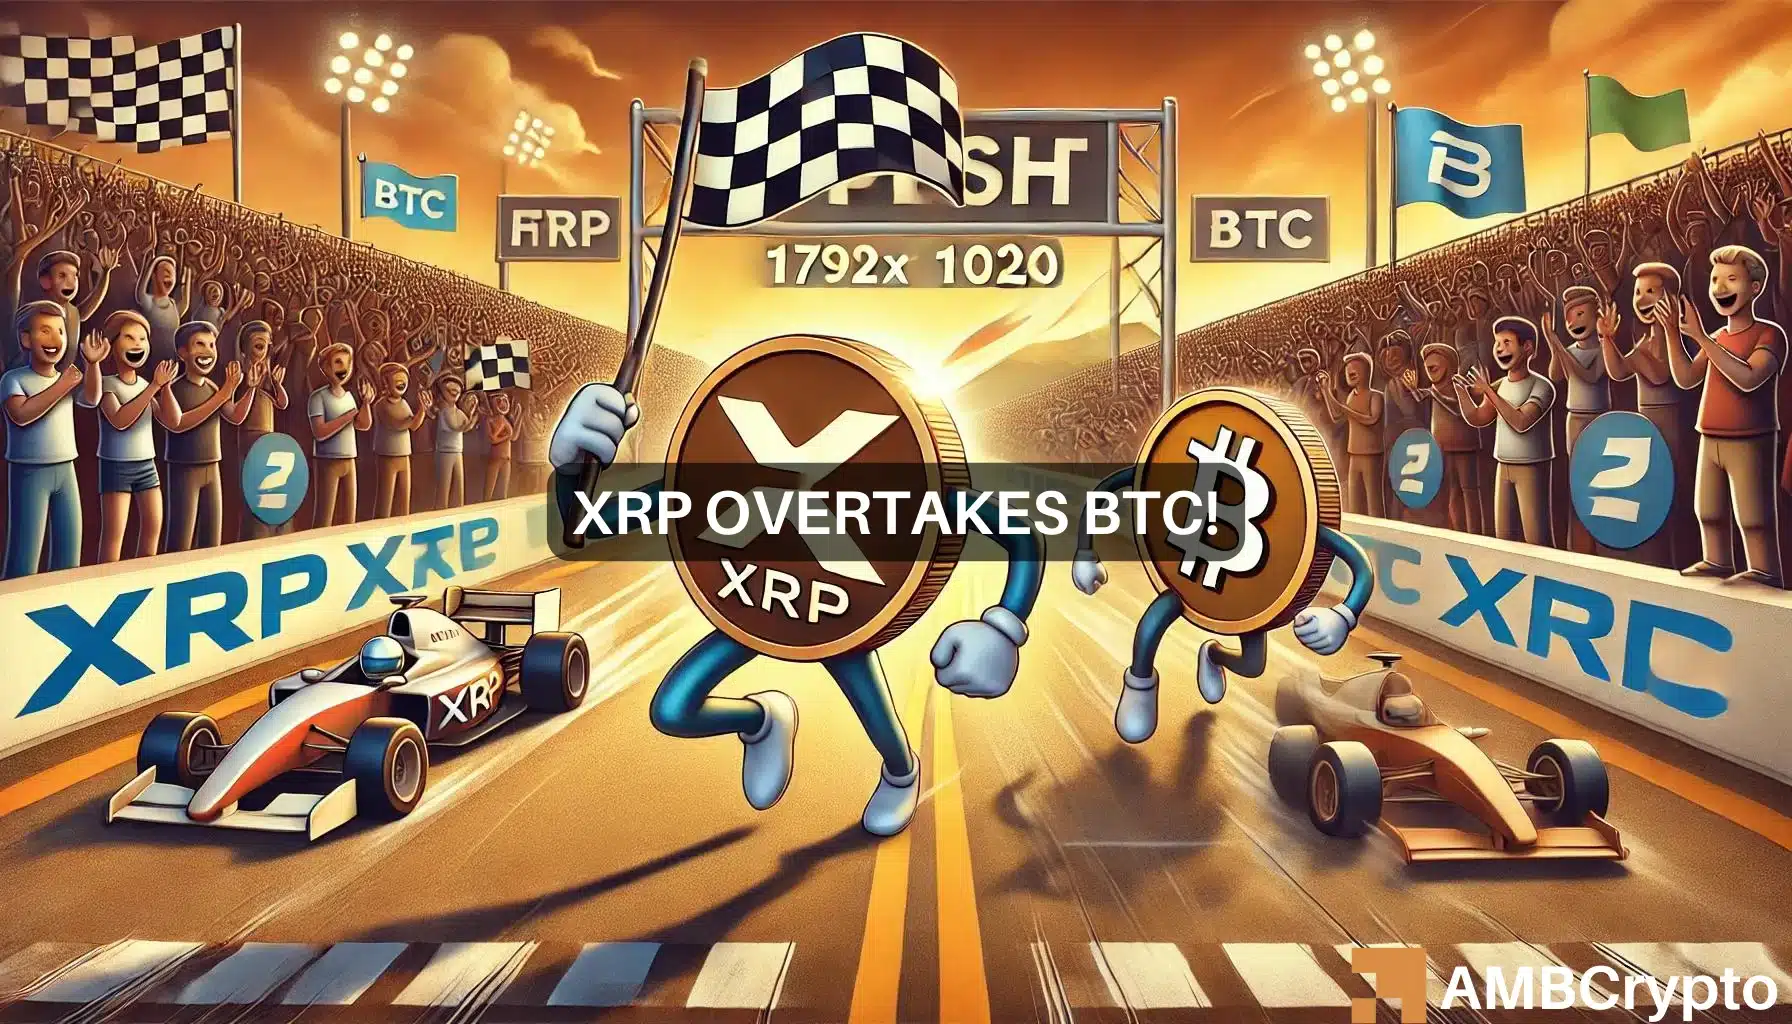 XRP overtakes Bitcoin in South Korea: Will positive sentiment fuel the altcoin?